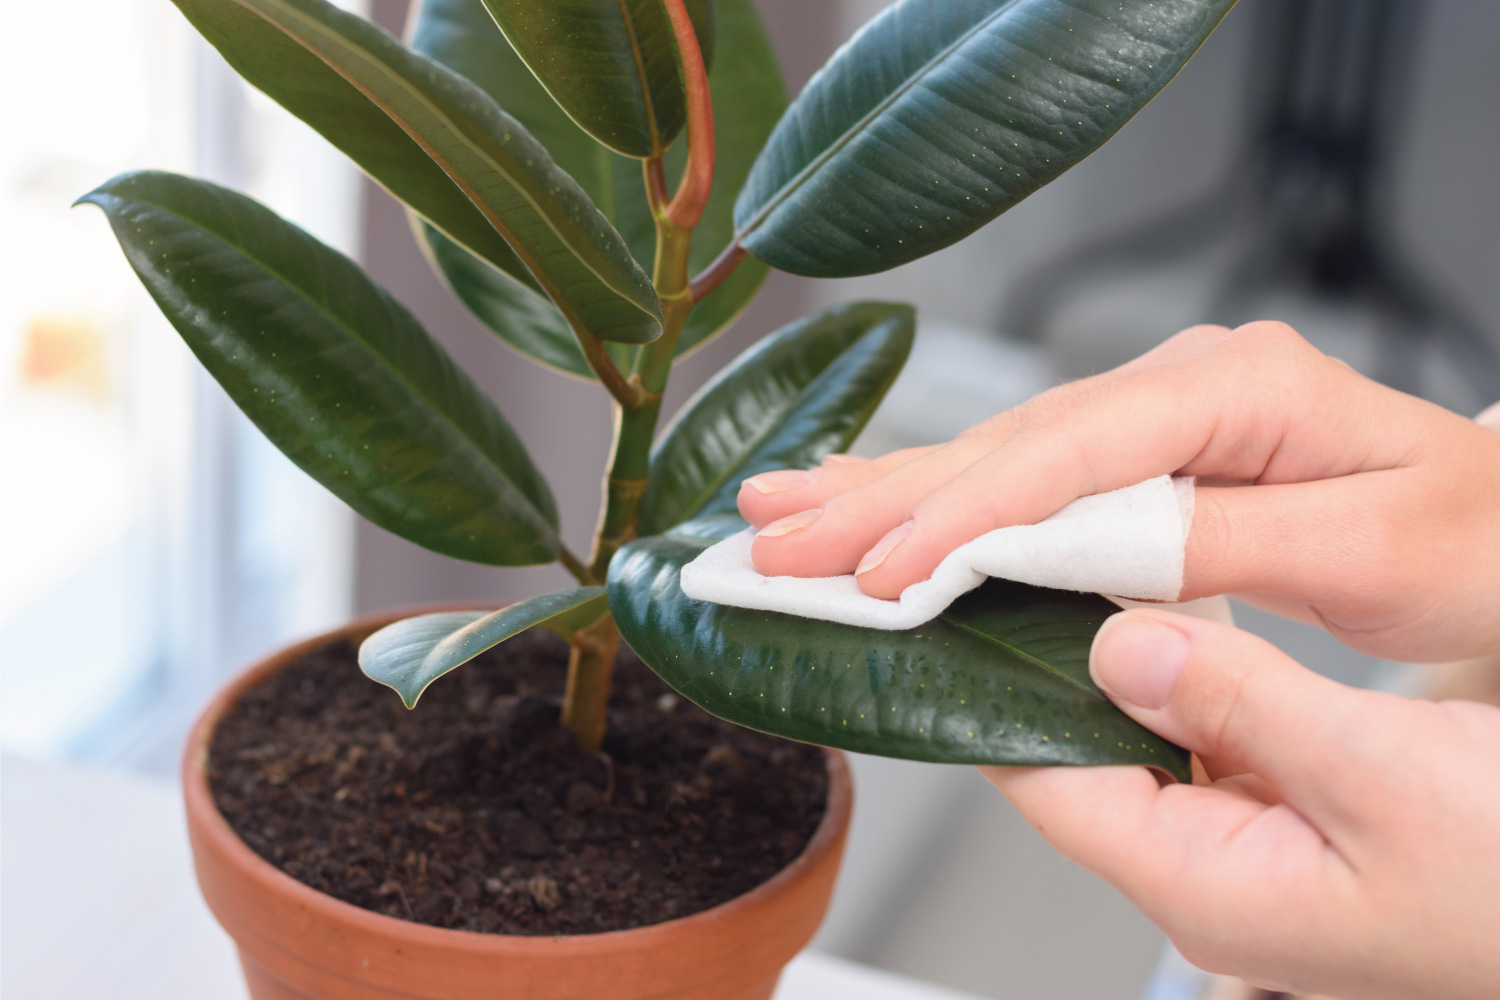 Girl's hands wipe the dust from a ficus plant